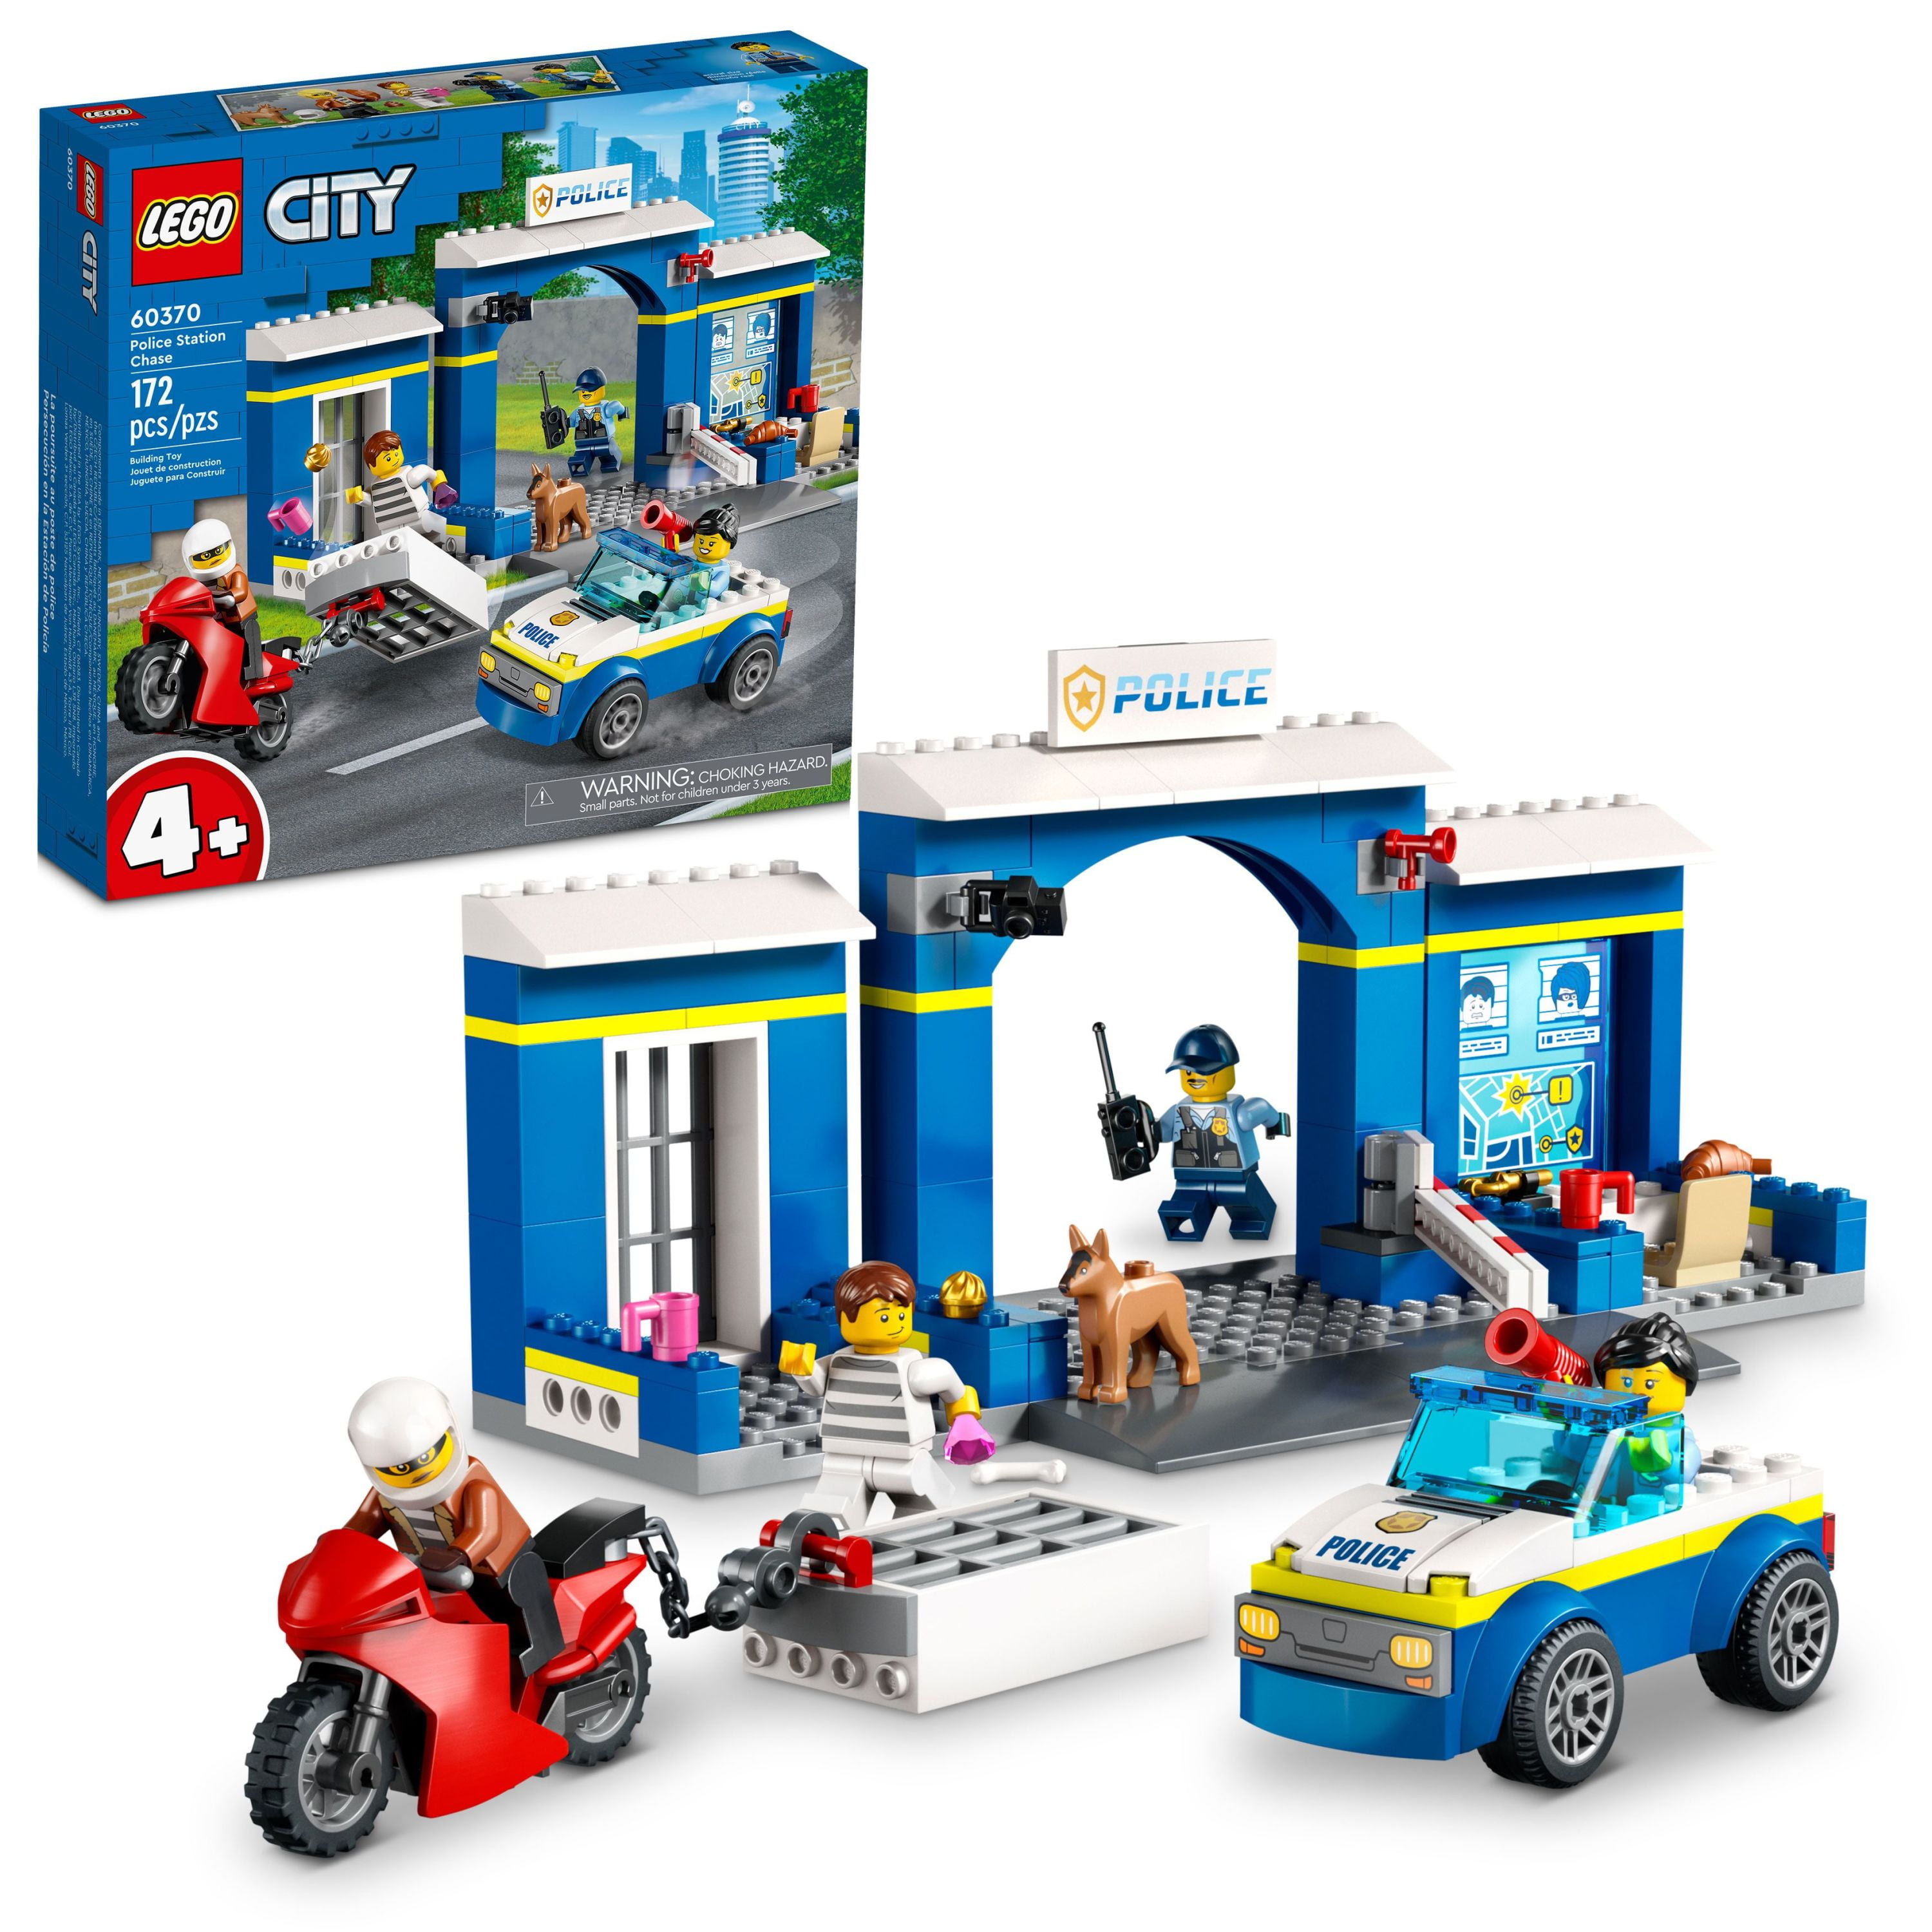 LEGO City Police Car Toy for Kids 5 Plus Years Old